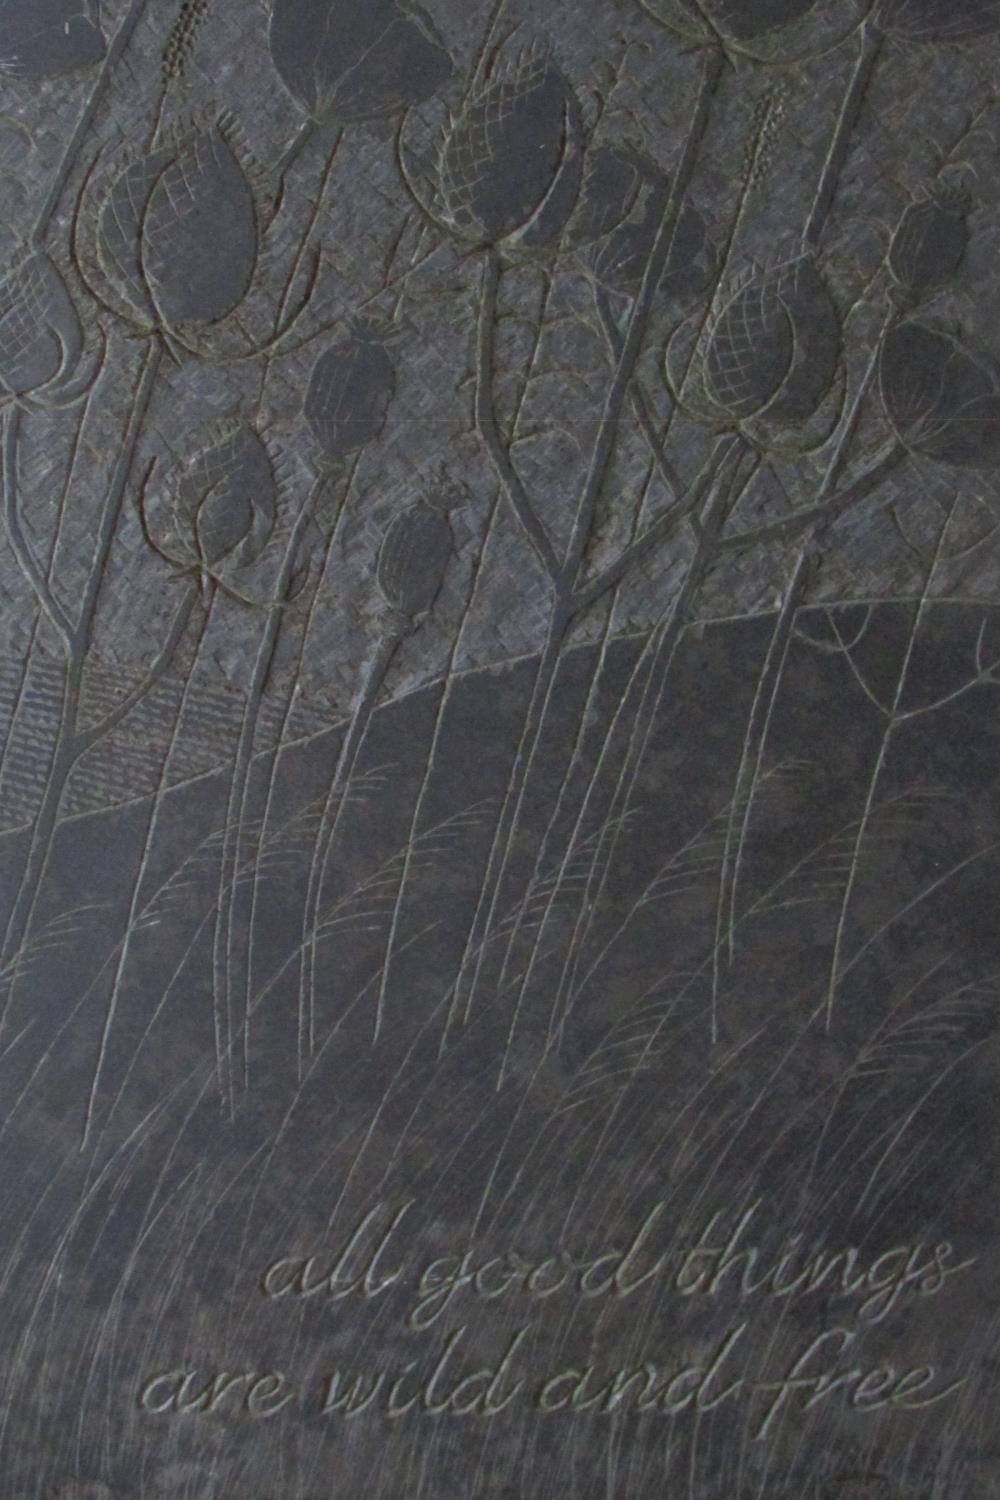 A carved slate panel with carved thistles and poppies design in a contoured landscape - 'All good - Image 2 of 3